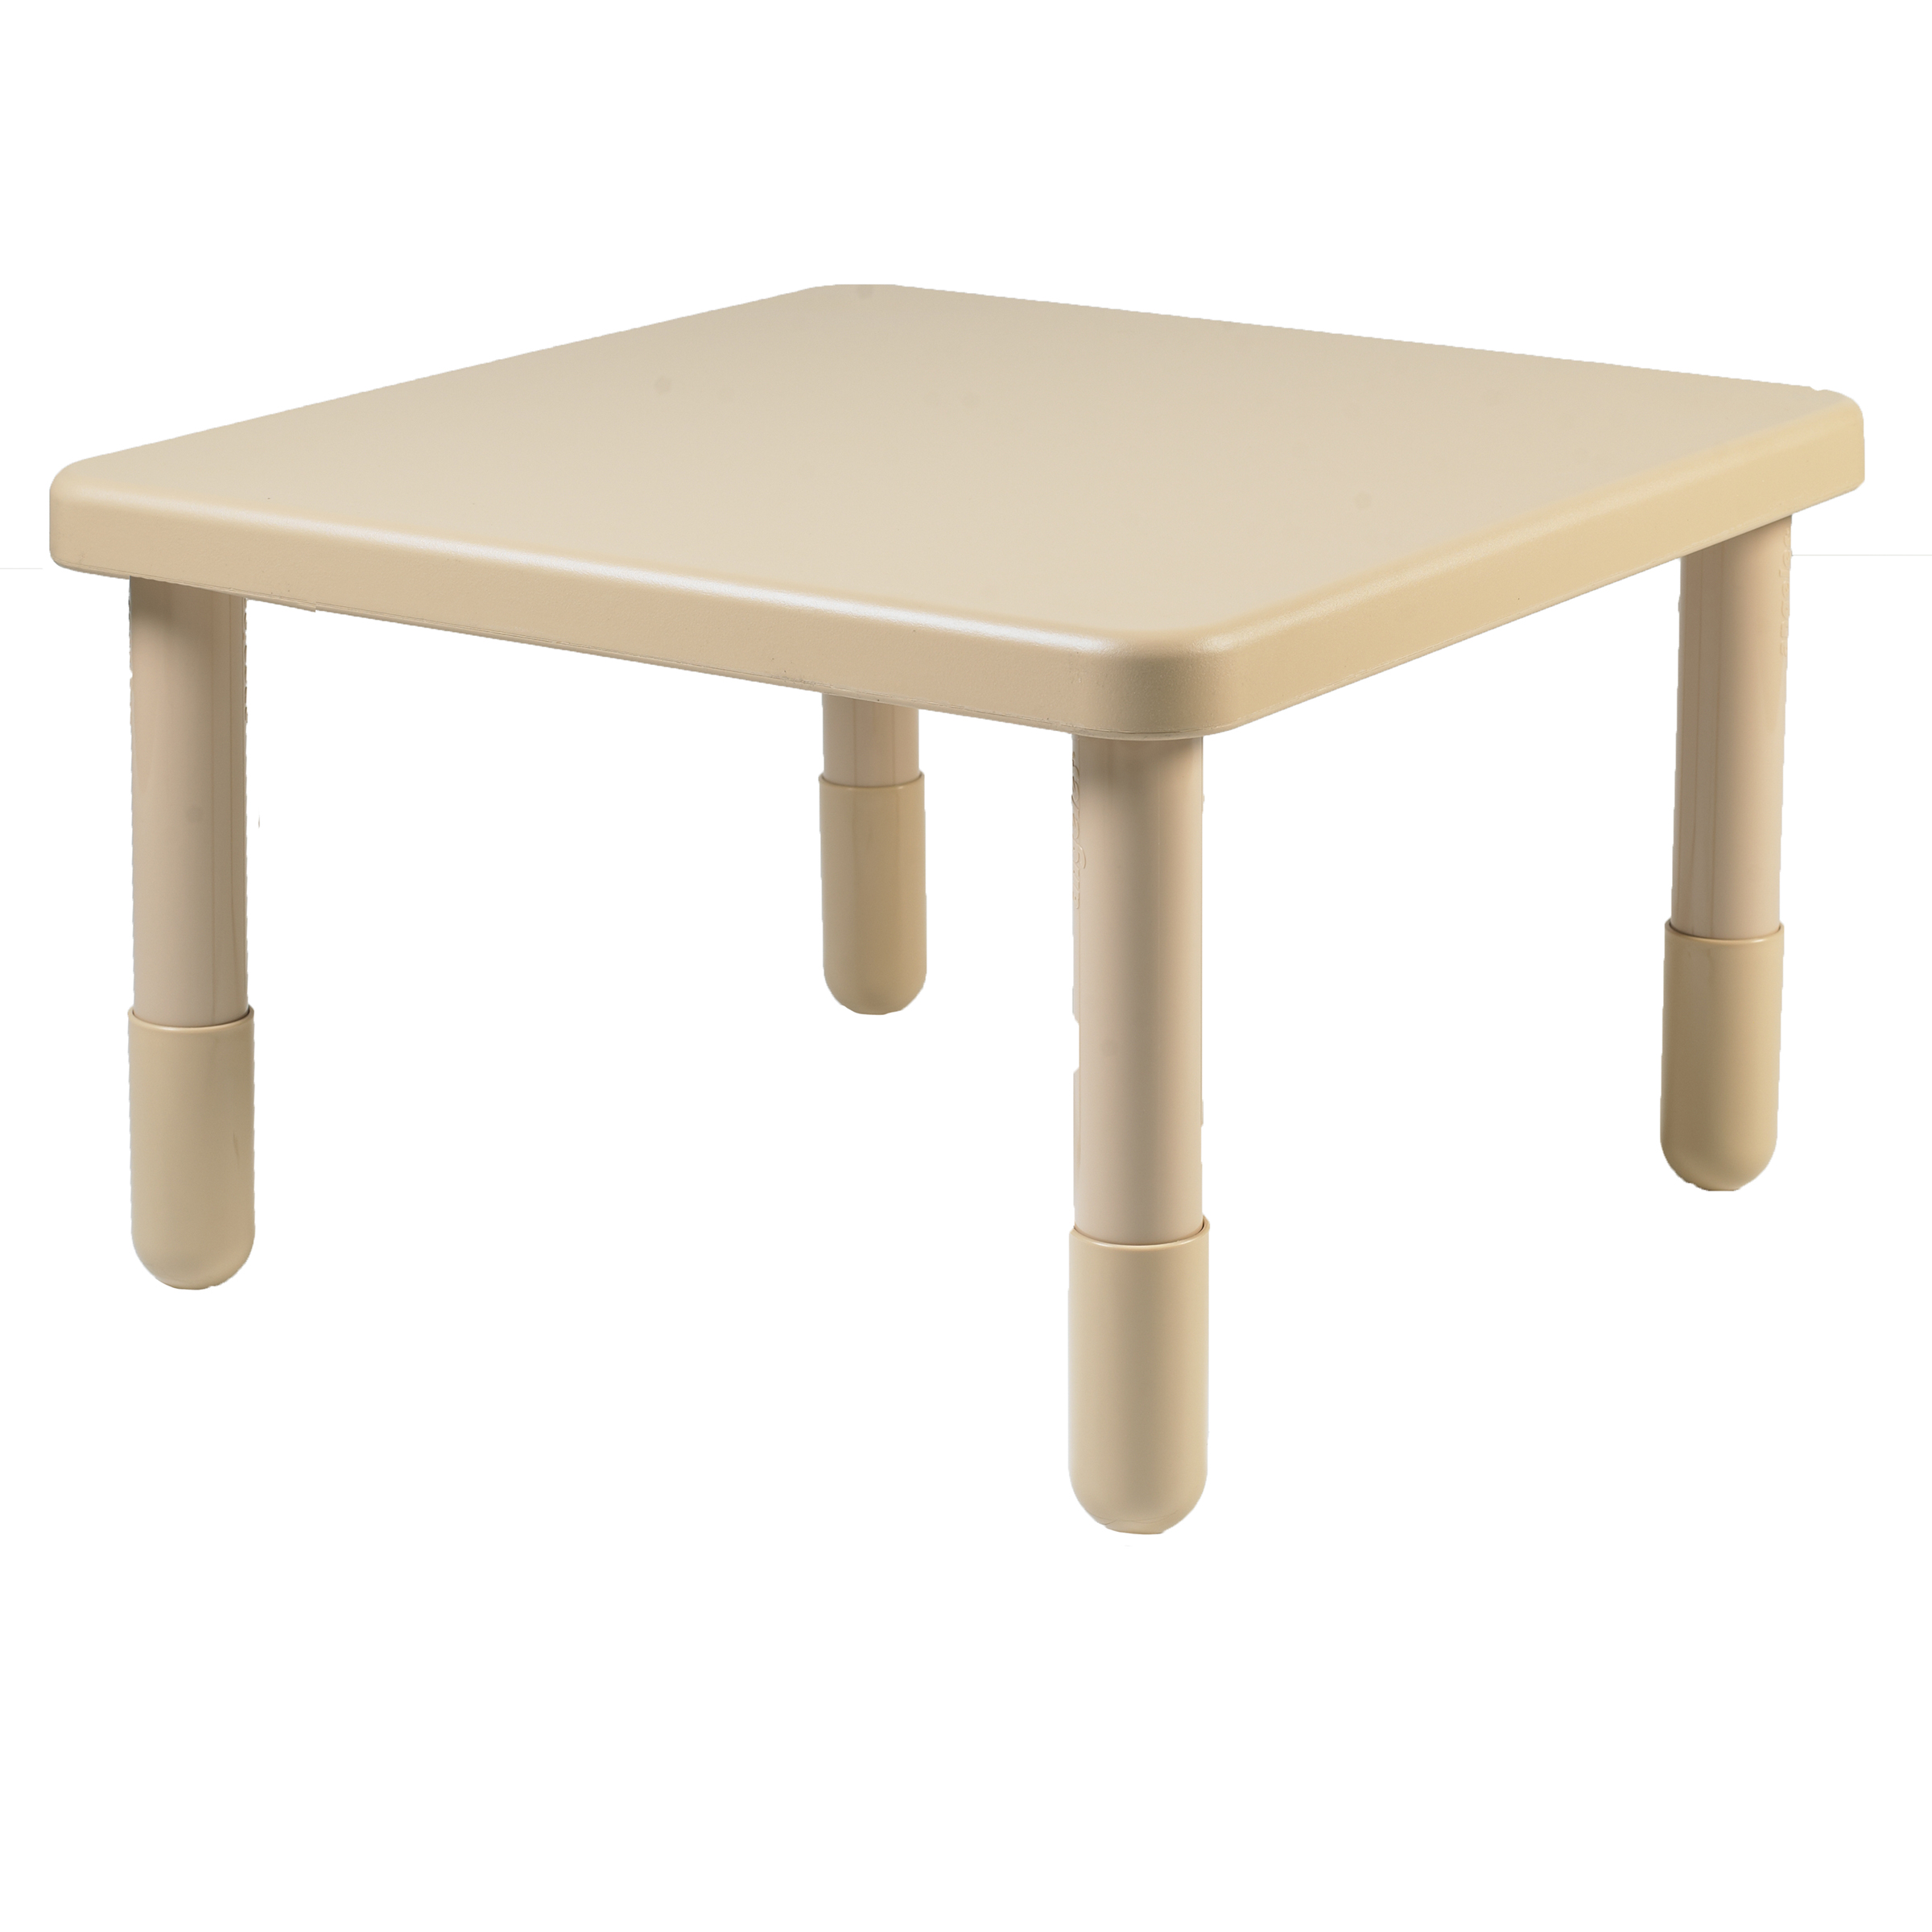 Value 71 cm  Square Table - Natural Tan with 45,5 cm  Legs